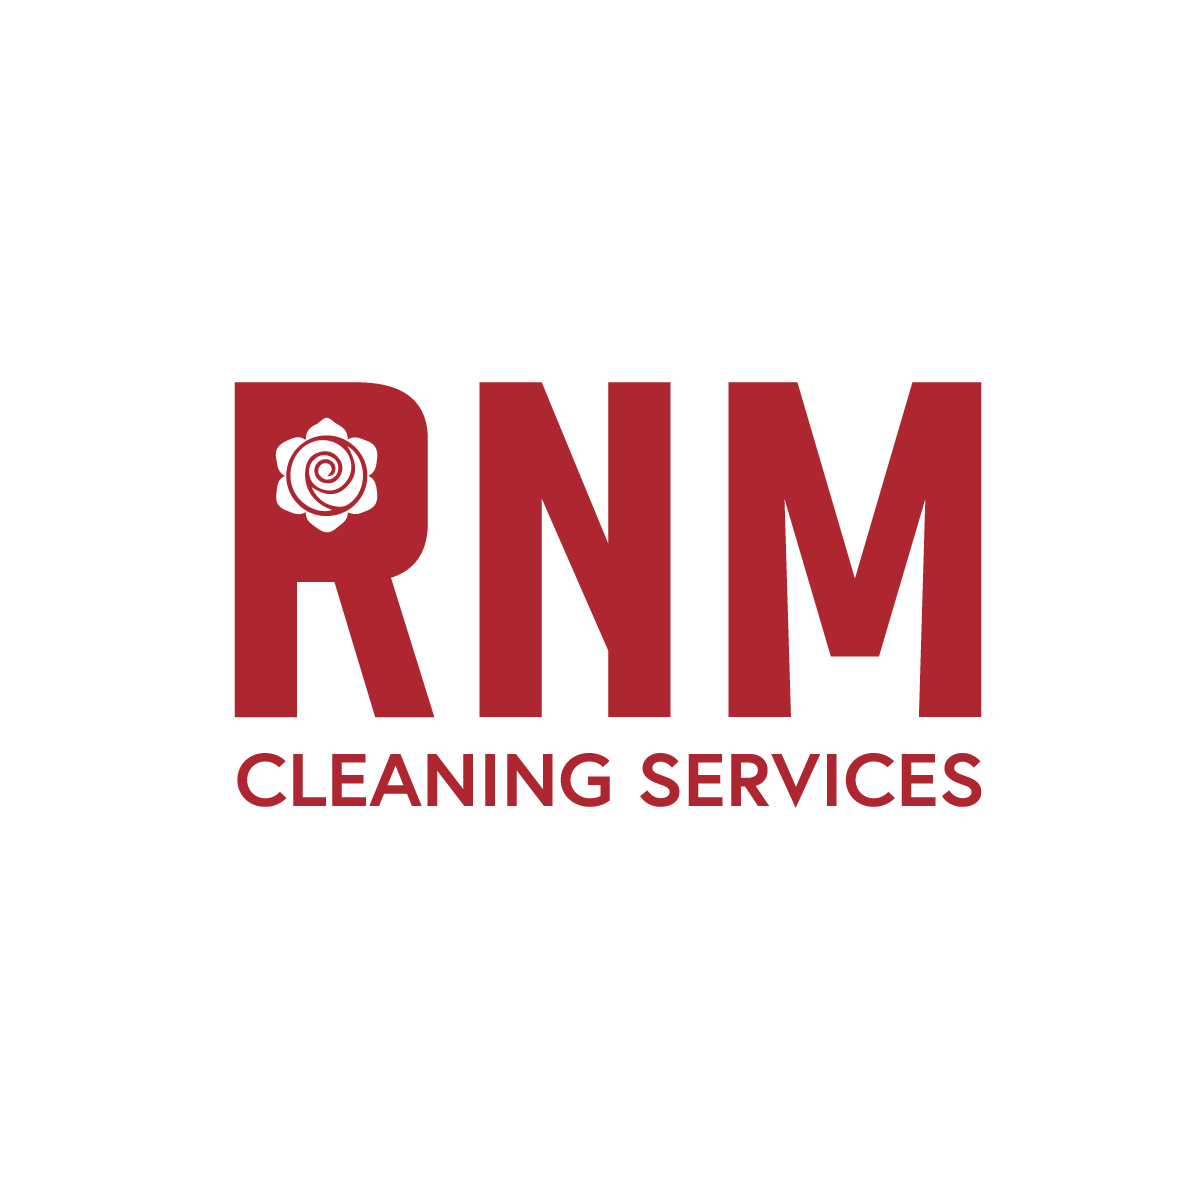 RNM Cleaning